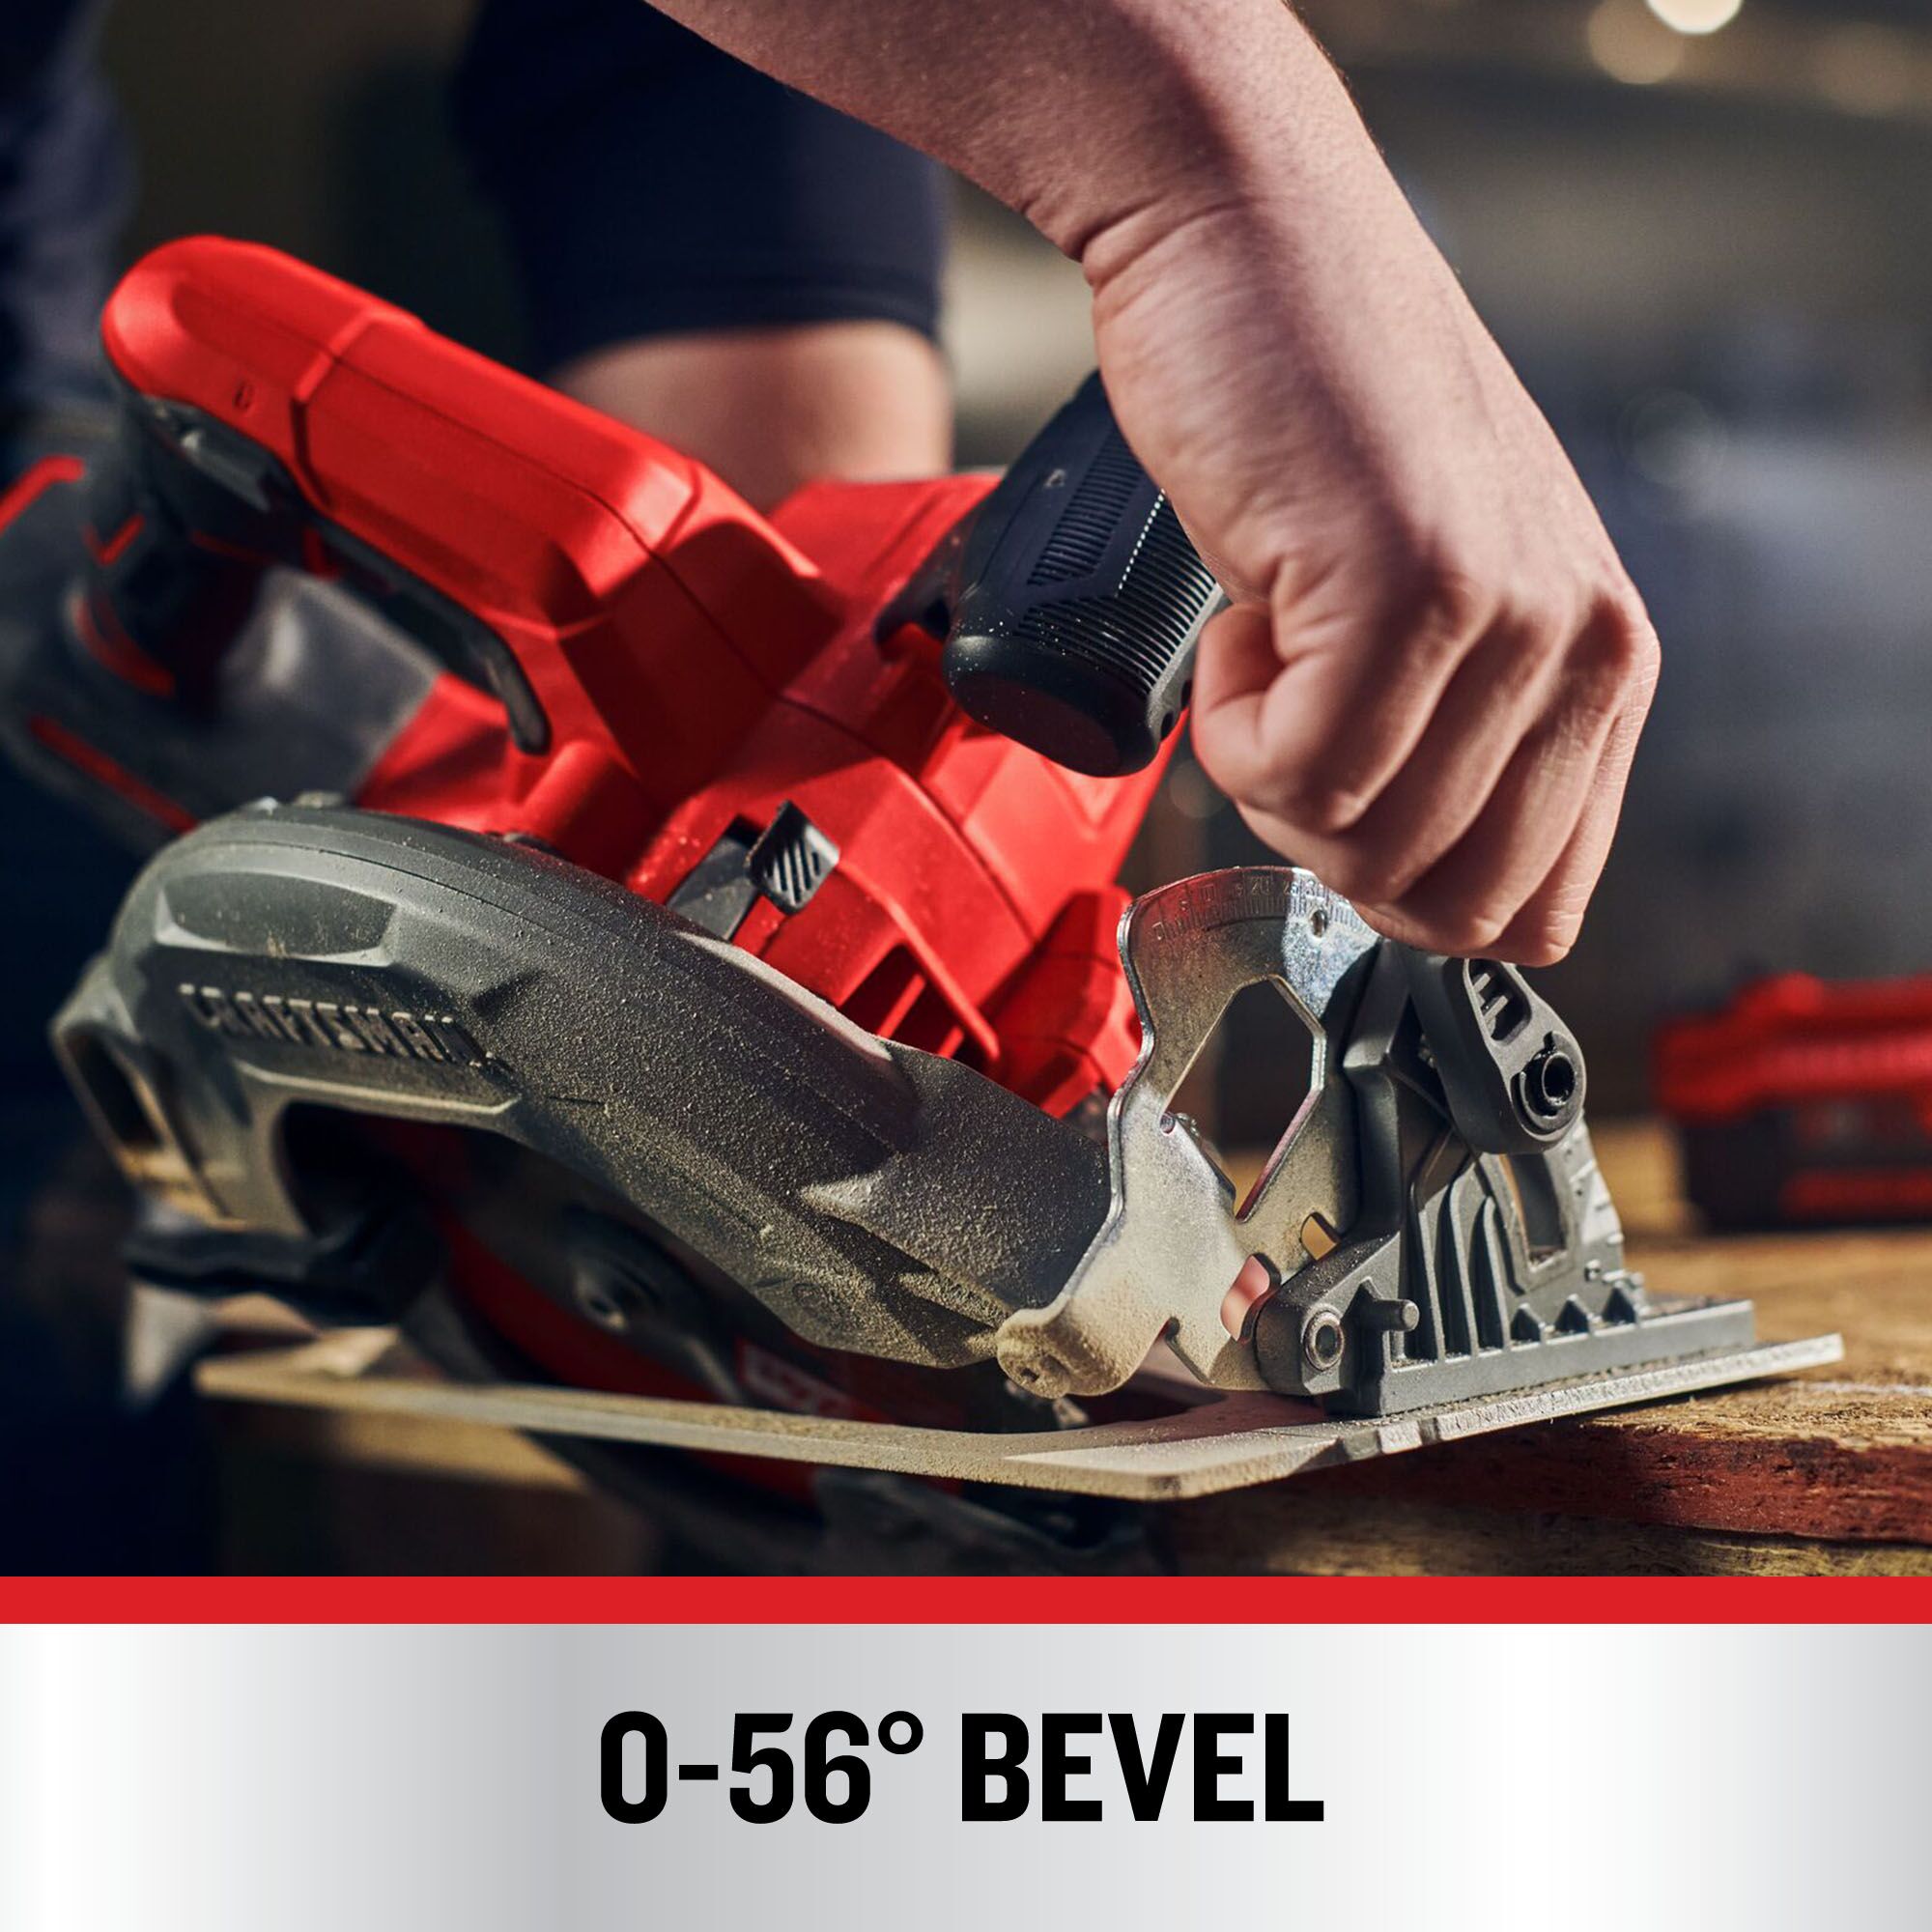 2018 Best in DIY — What to Look for in a Cordless Circular Saw